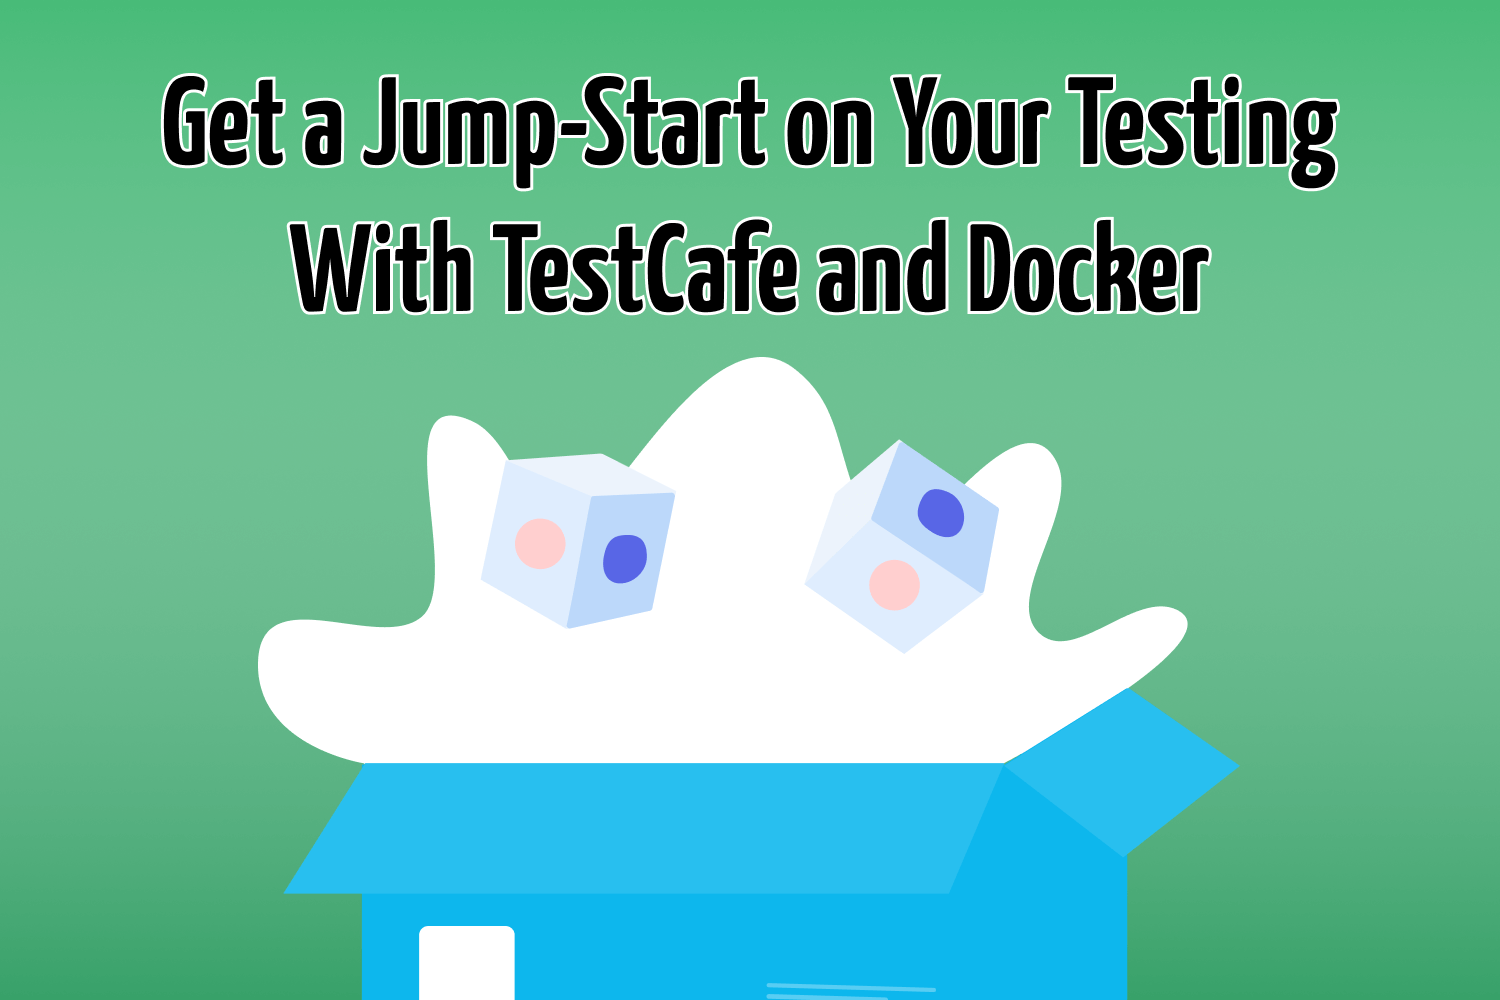 Get a Jump-Start on Your Testing With TestCafe and Docker